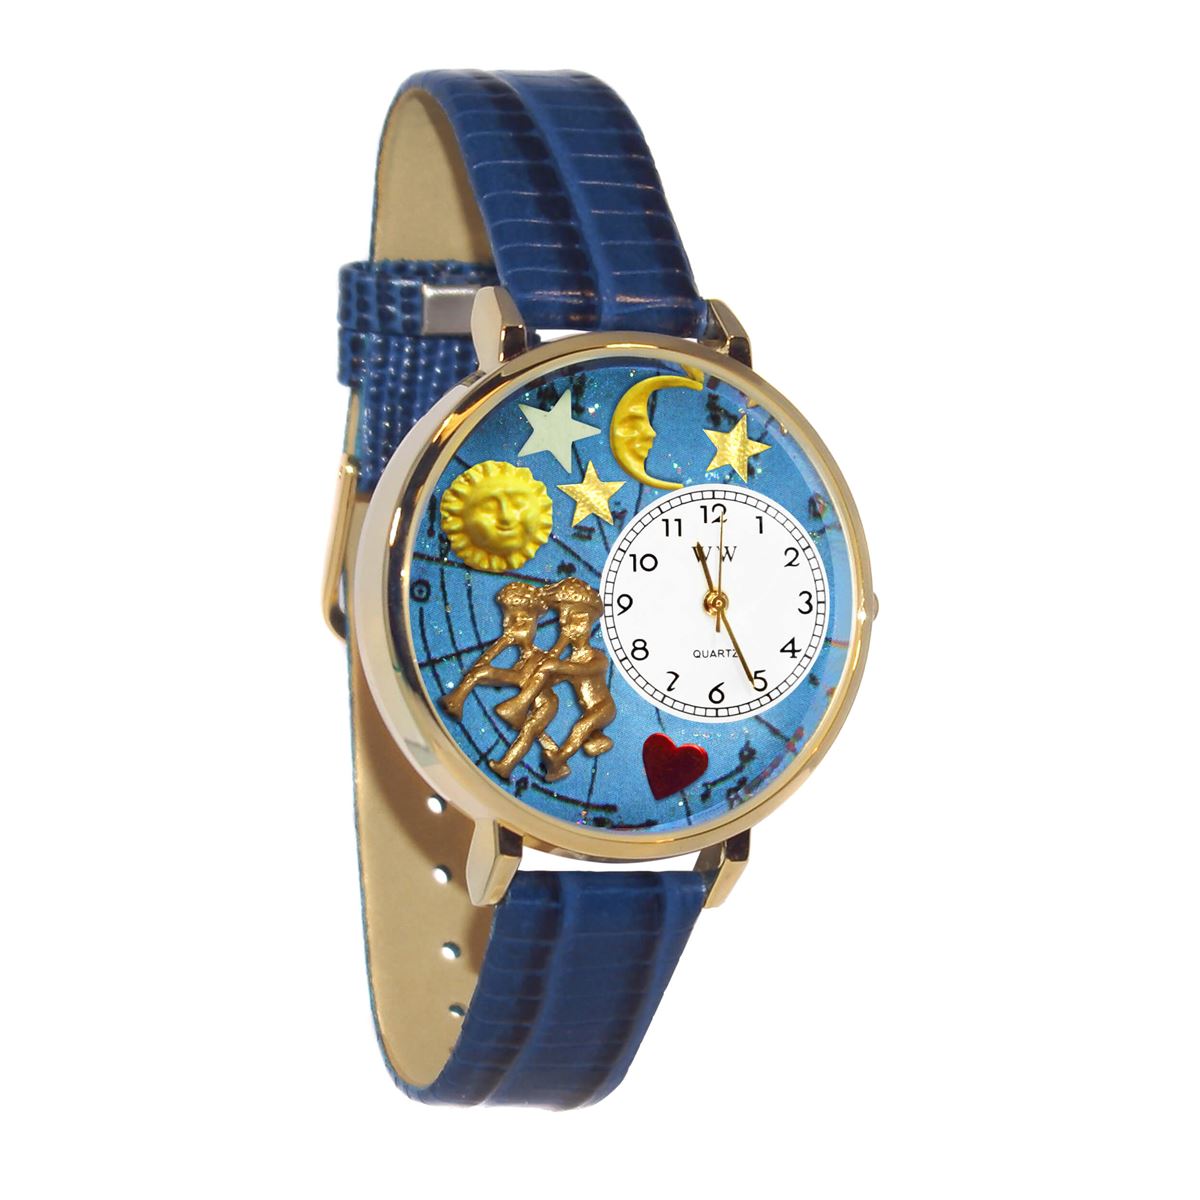 Whimsical Gifts | Gemini Zodiac 3D Watch Large Style | Handmade in USA | Zodiac & Celestial |  | Novelty Unique Fun Miniatures Gift | Gold Finish Royal Blue Leather Watch Band